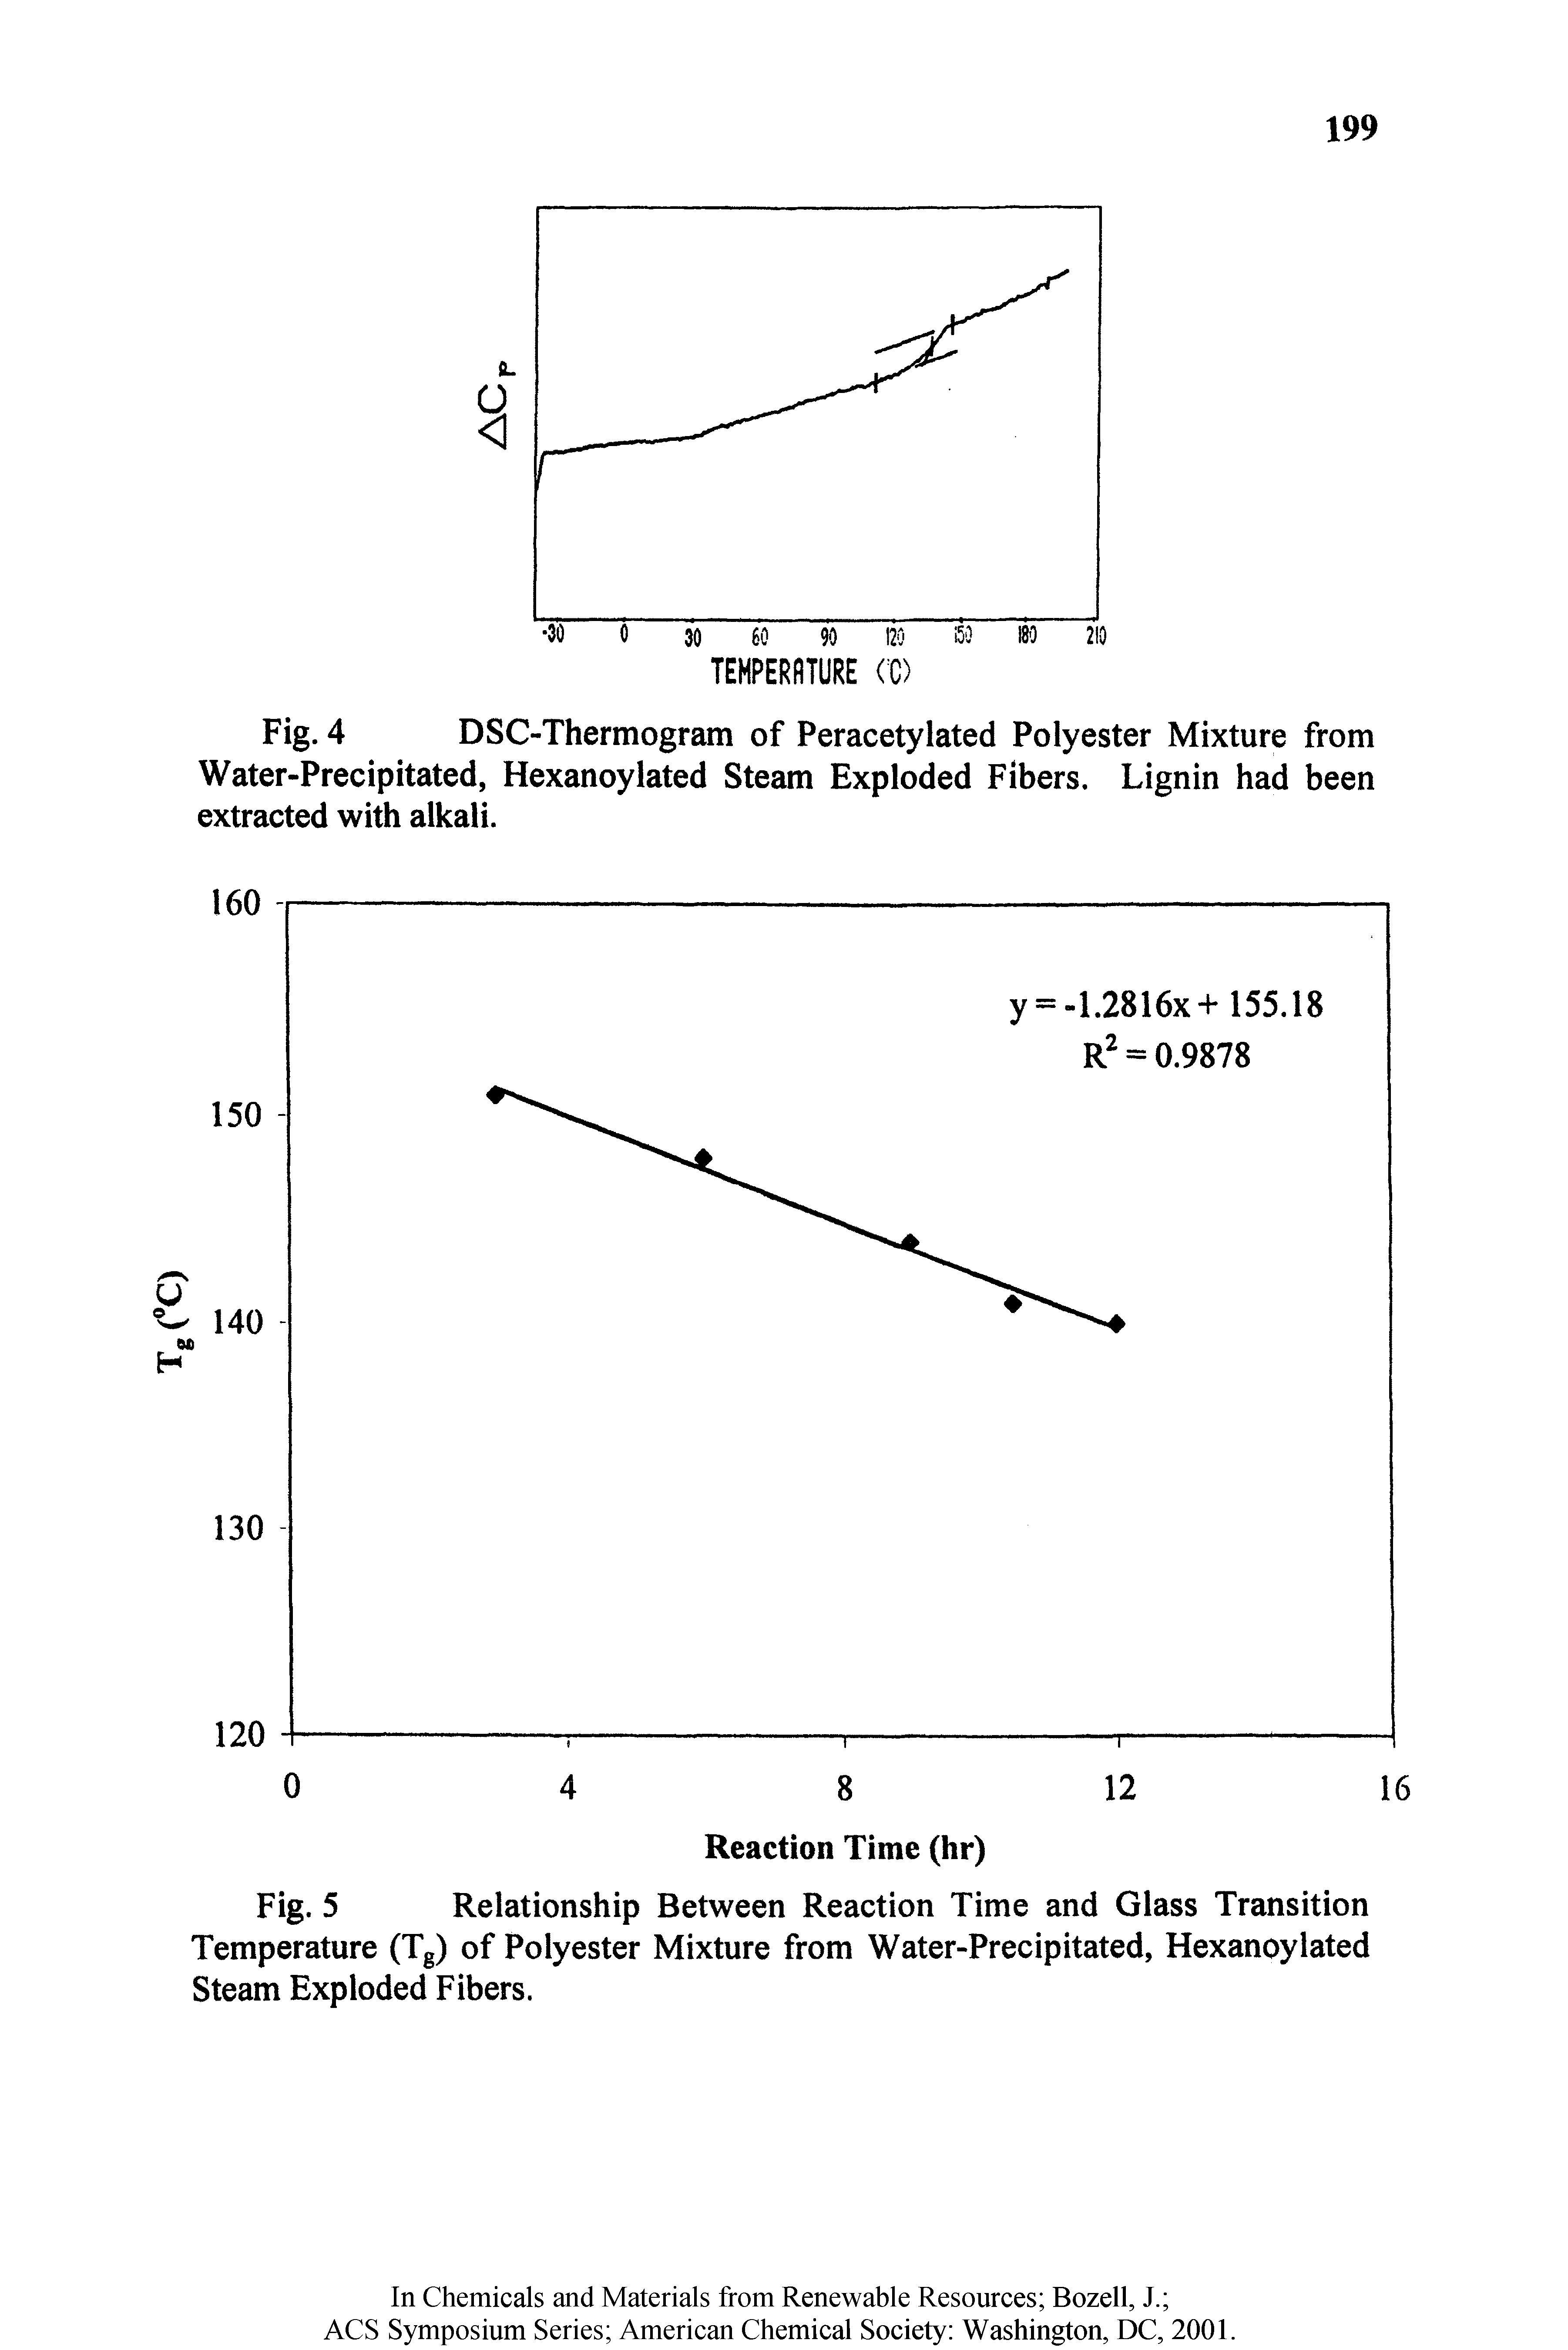 Fig. 5 Relationship Between Reaction Time and Glass Transition Temperature (Tg) of Polyester Mixture from Water-Precipitated, Hexanoylated Steam Exploded Fibers.